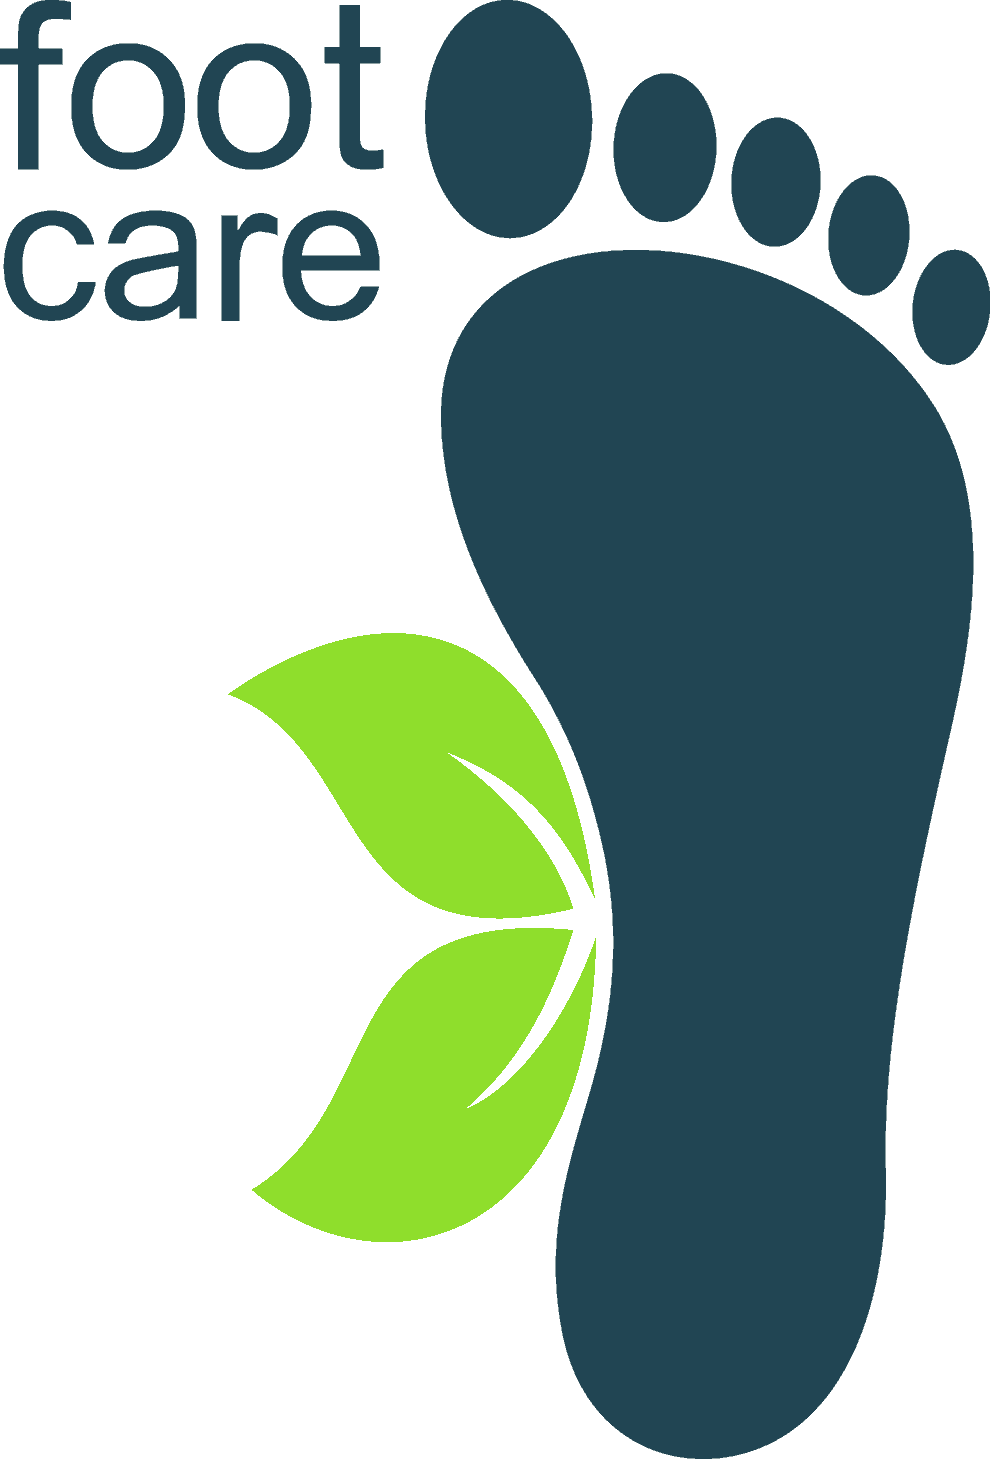 Foot care Image